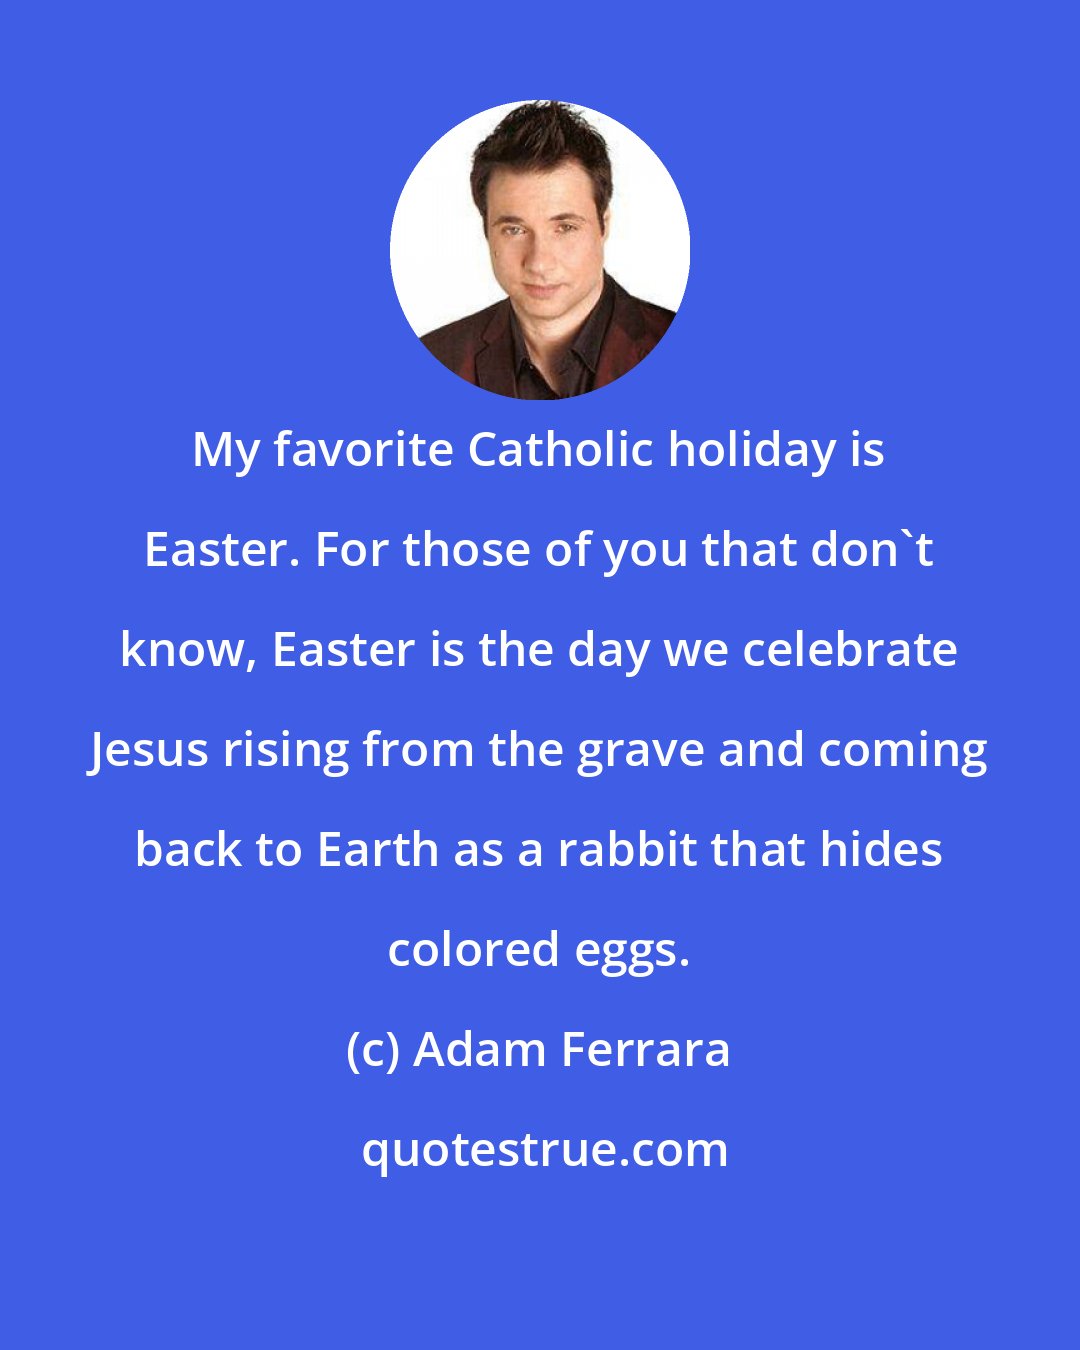 Adam Ferrara: My favorite Catholic holiday is Easter. For those of you that don't know, Easter is the day we celebrate Jesus rising from the grave and coming back to Earth as a rabbit that hides colored eggs.